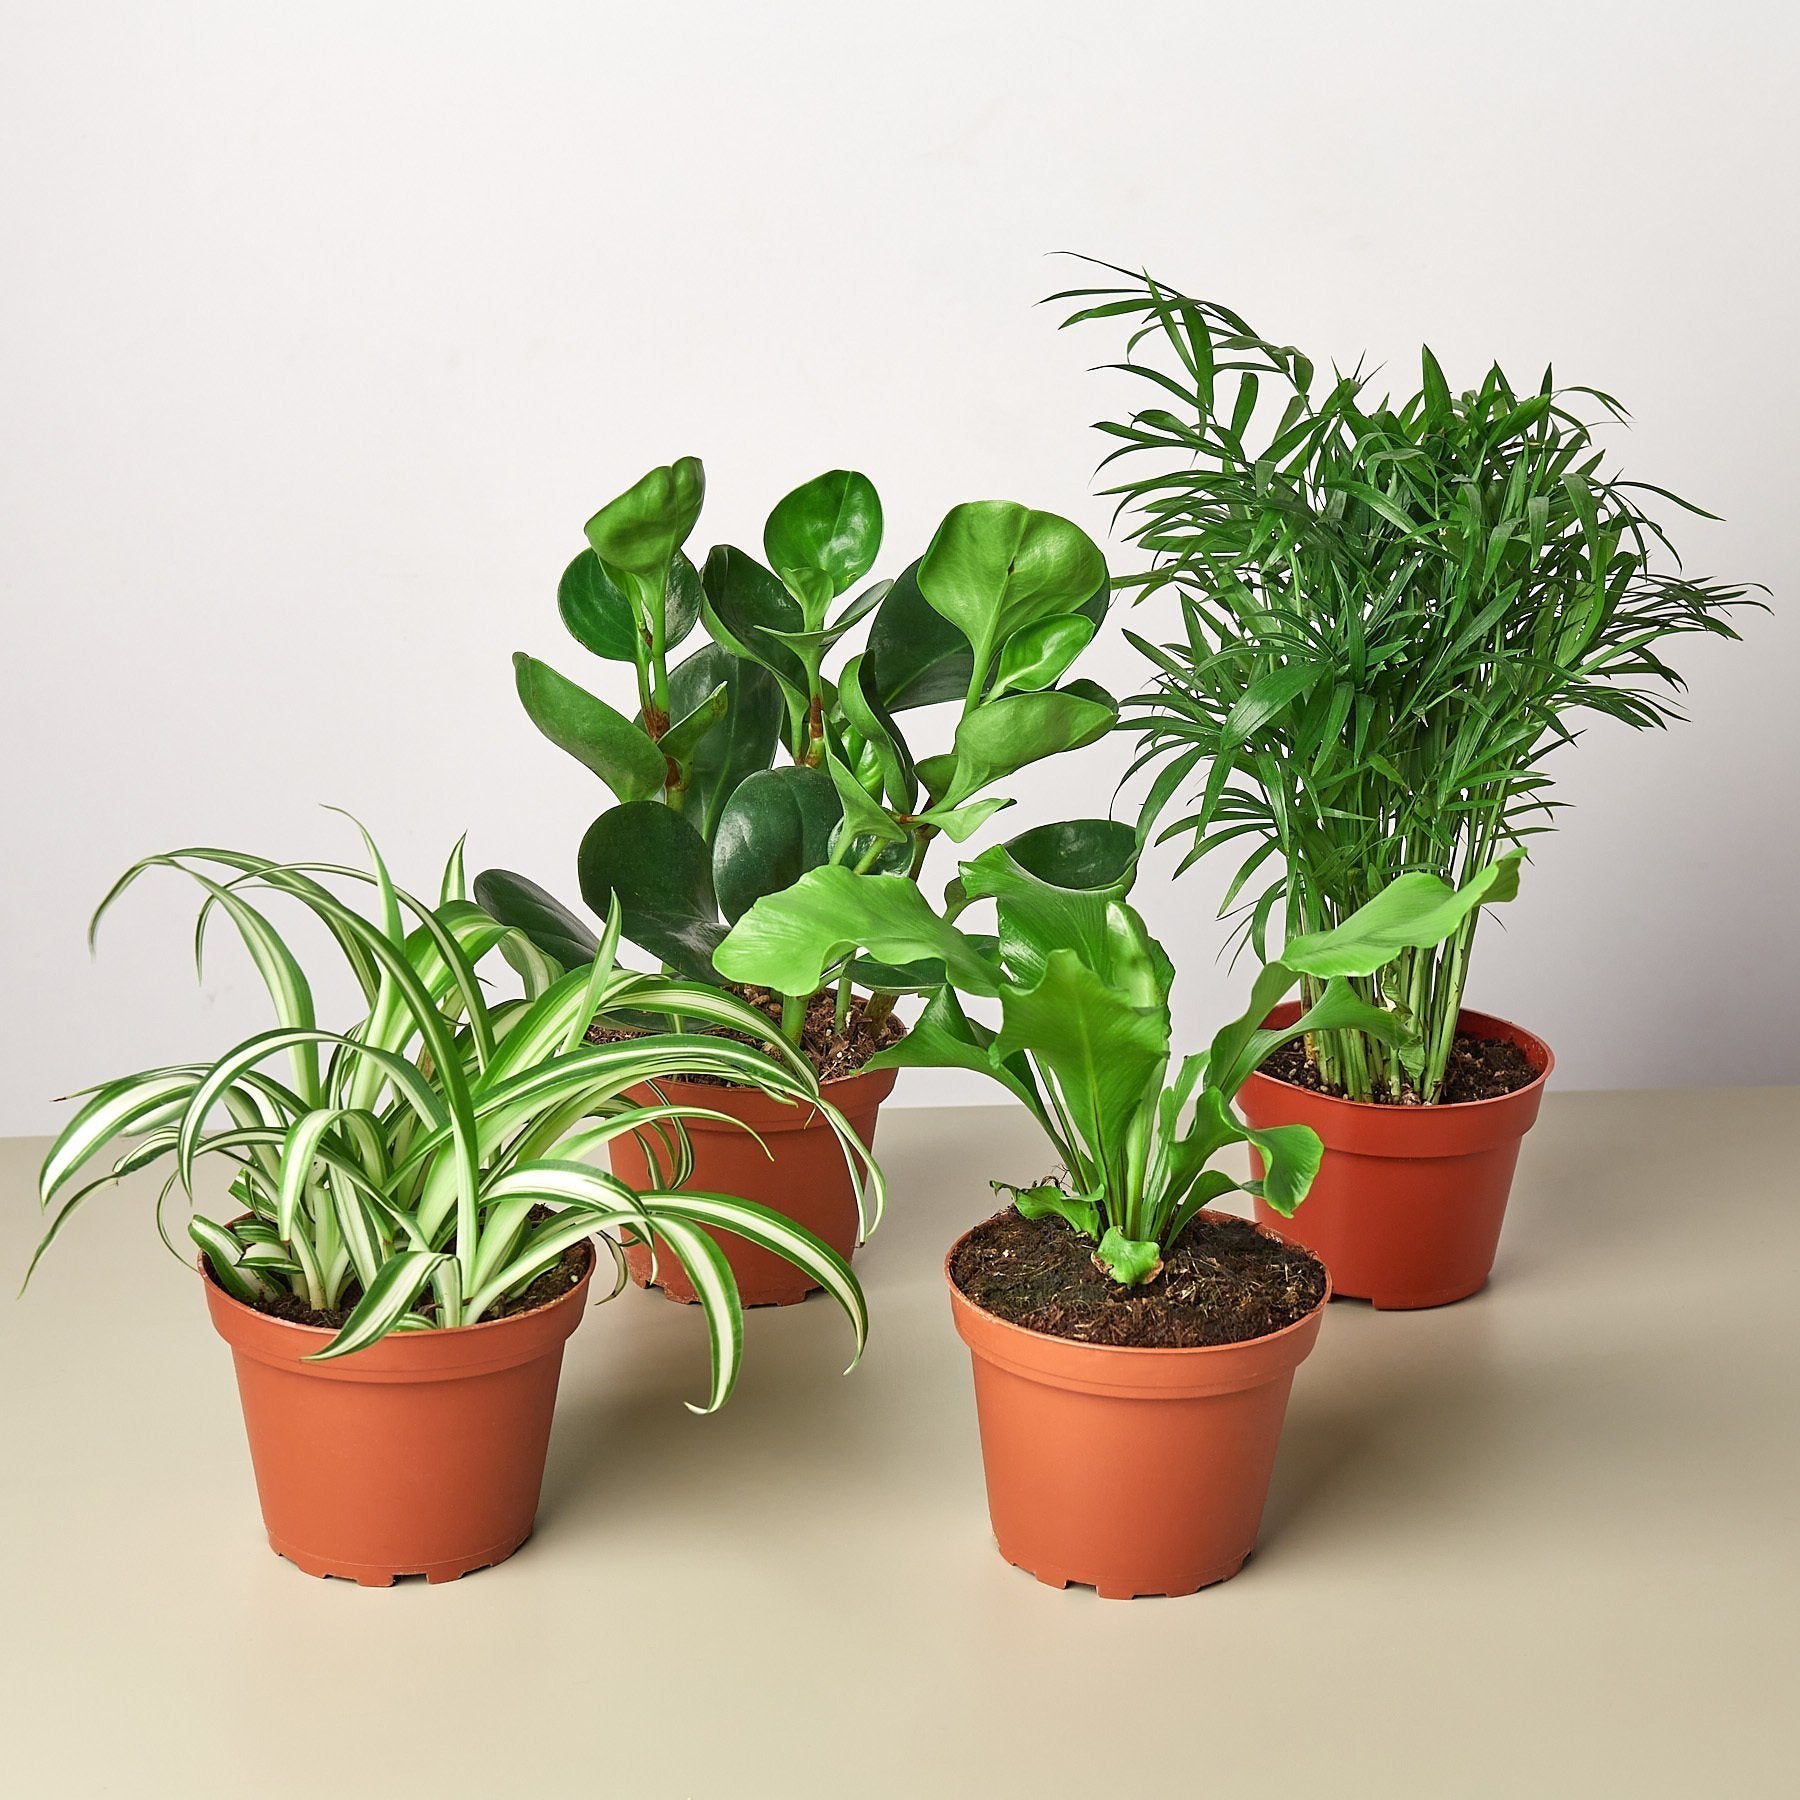 4 Pack of Pet Friendly and Air Purifying Live Indoor House Plants - 4" or 6" Potscategory_Decor from KimmyShop + miNATURALS - SHOPELEOS